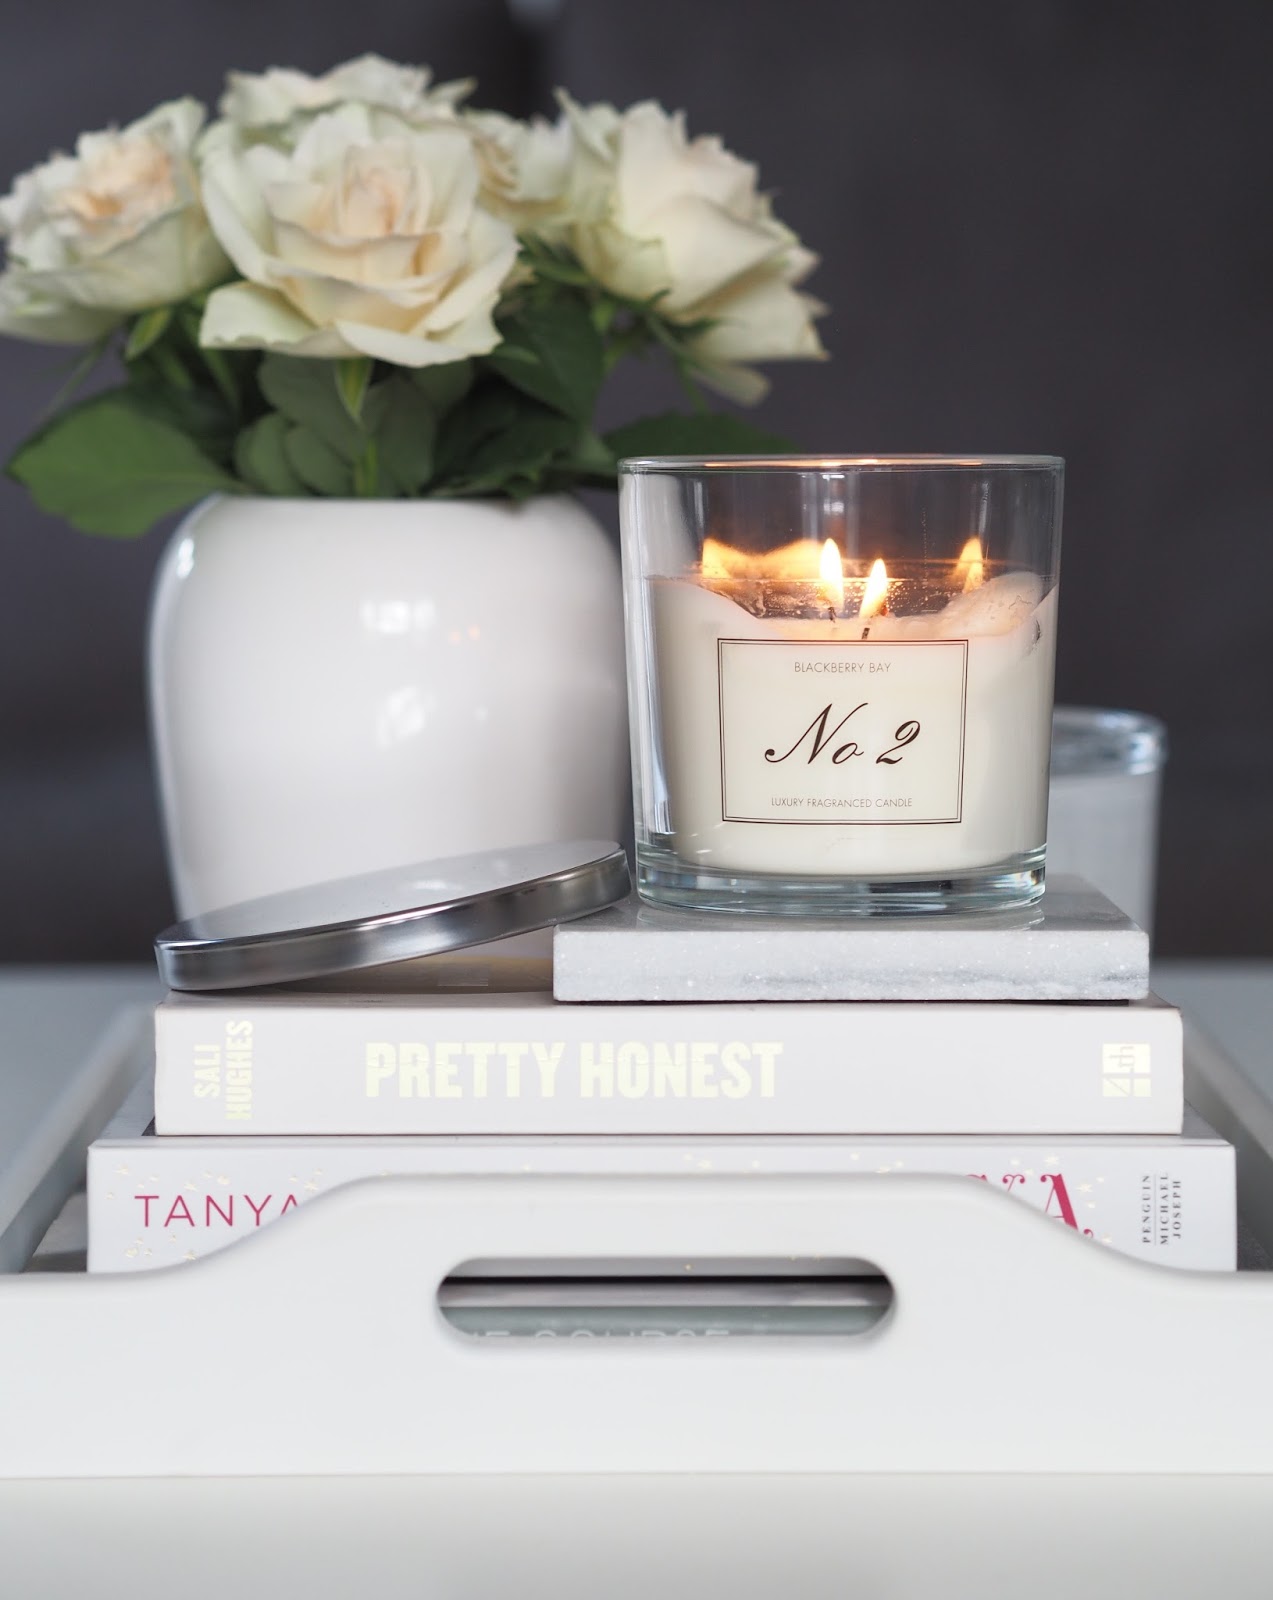 Thoughts on the Aldi candle dupe \ review \ Jo Malone \ Blackberry bay \ home fragrance \ Priceless Life of Mine \ over 40 lifestyle blog